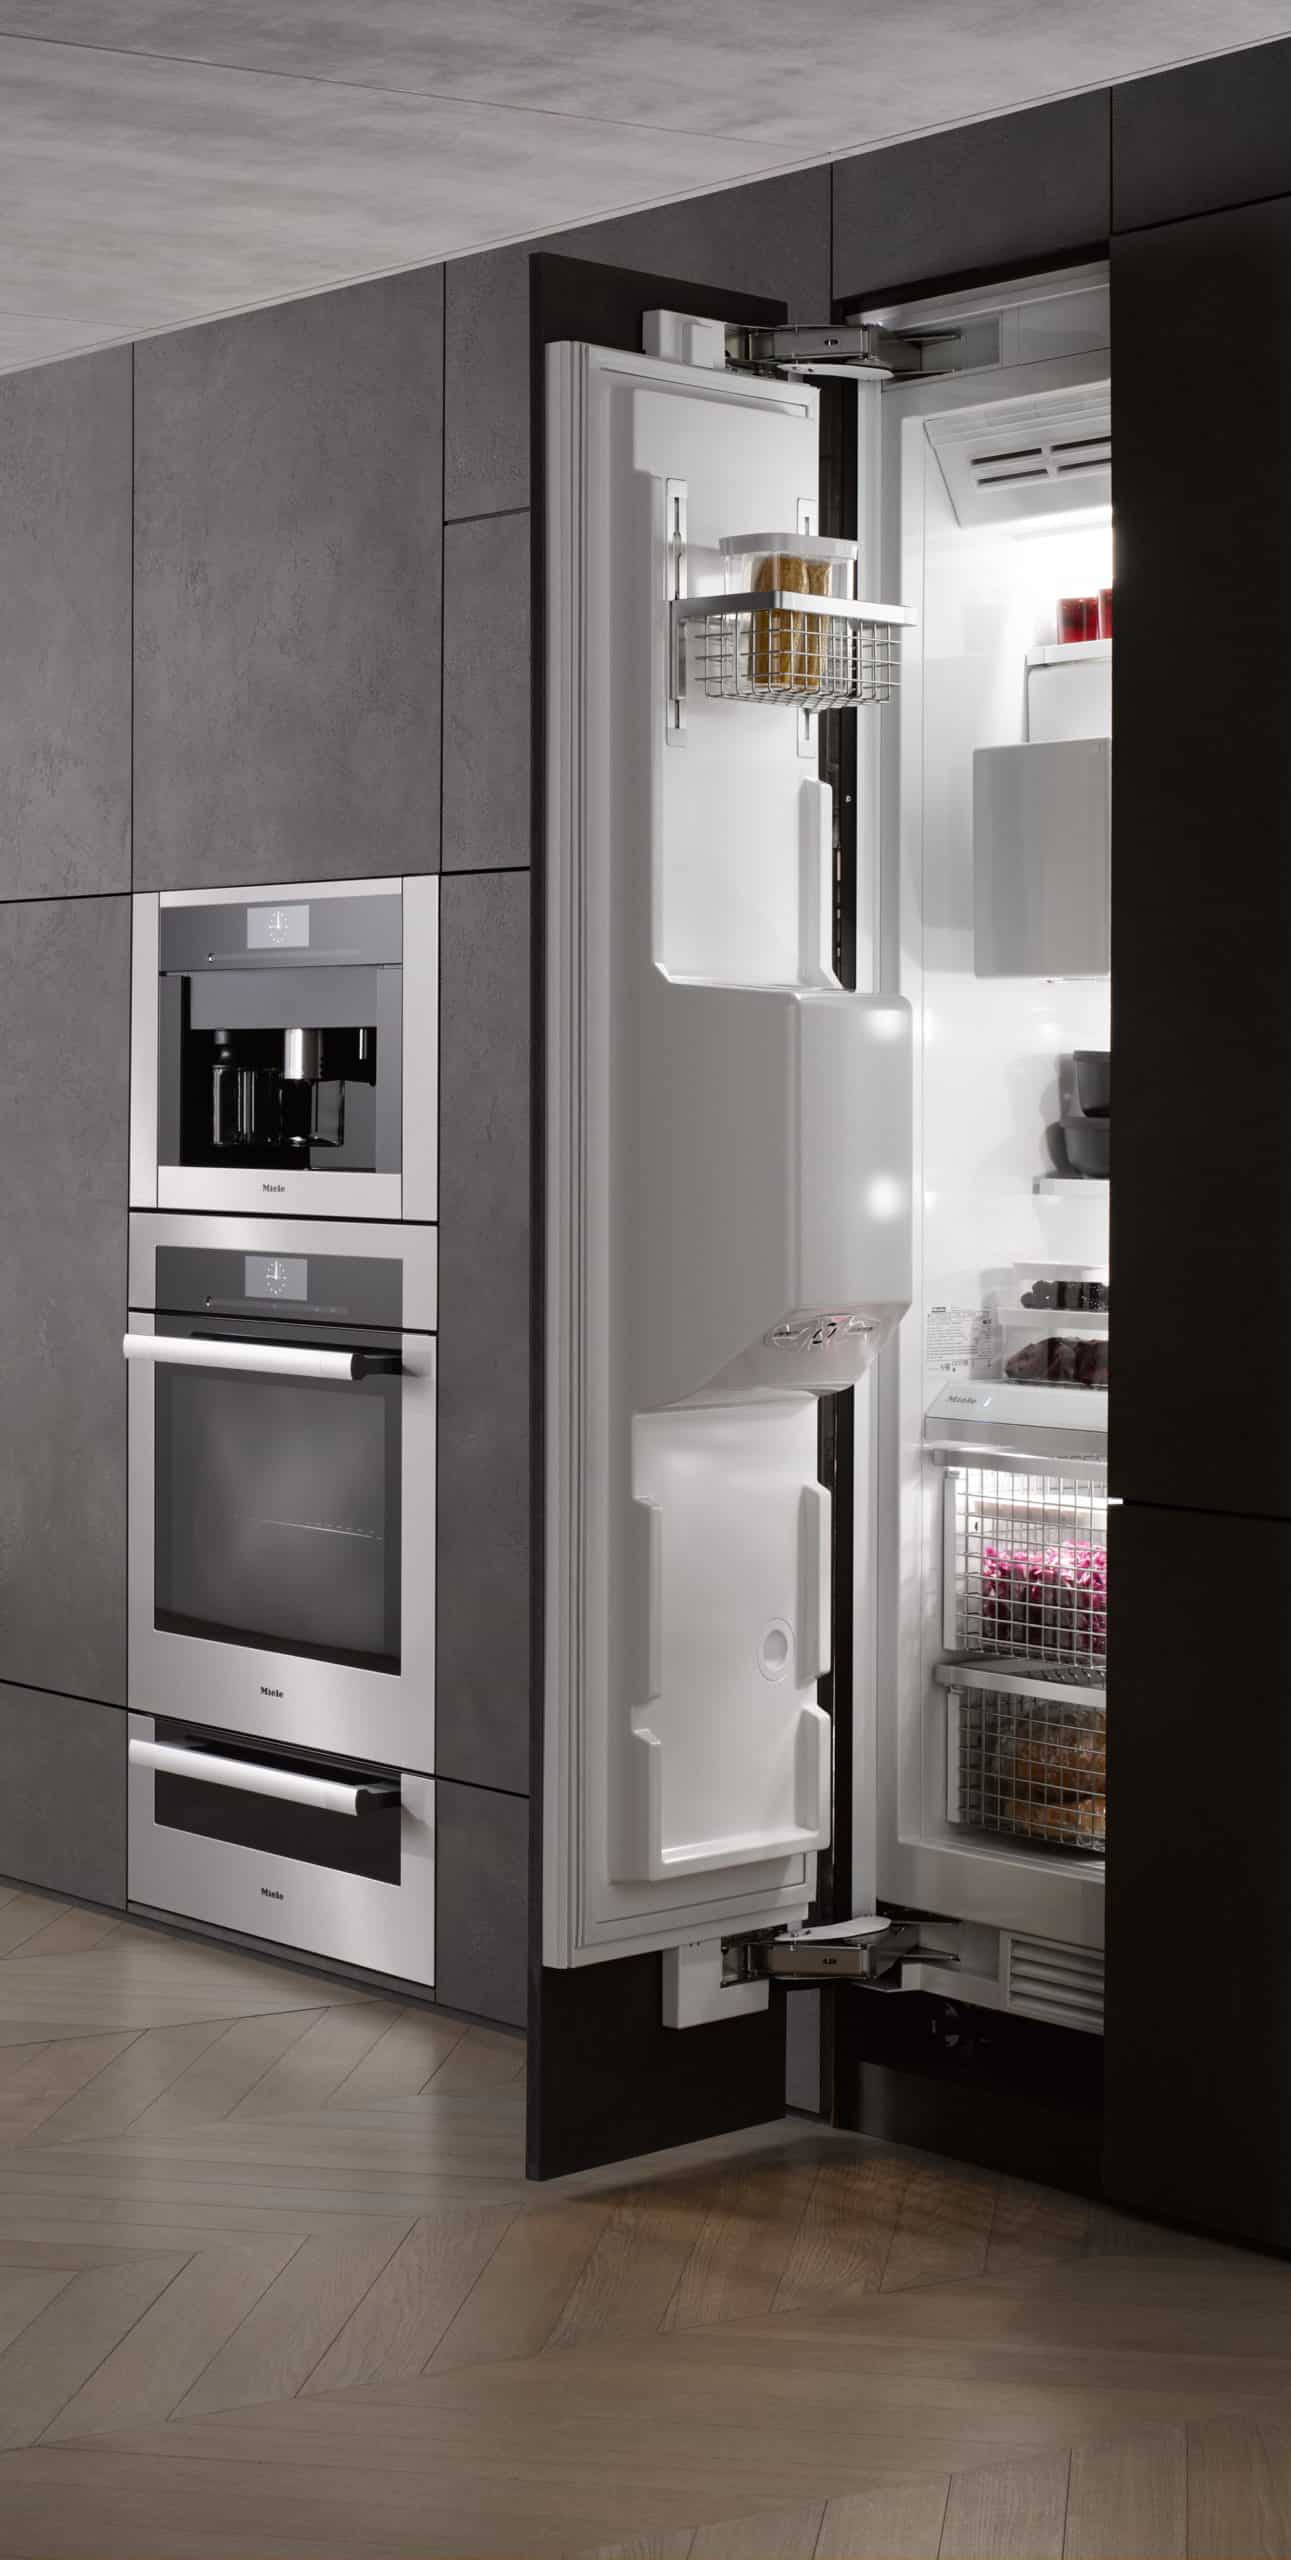 Miele Modern kitchen solutions